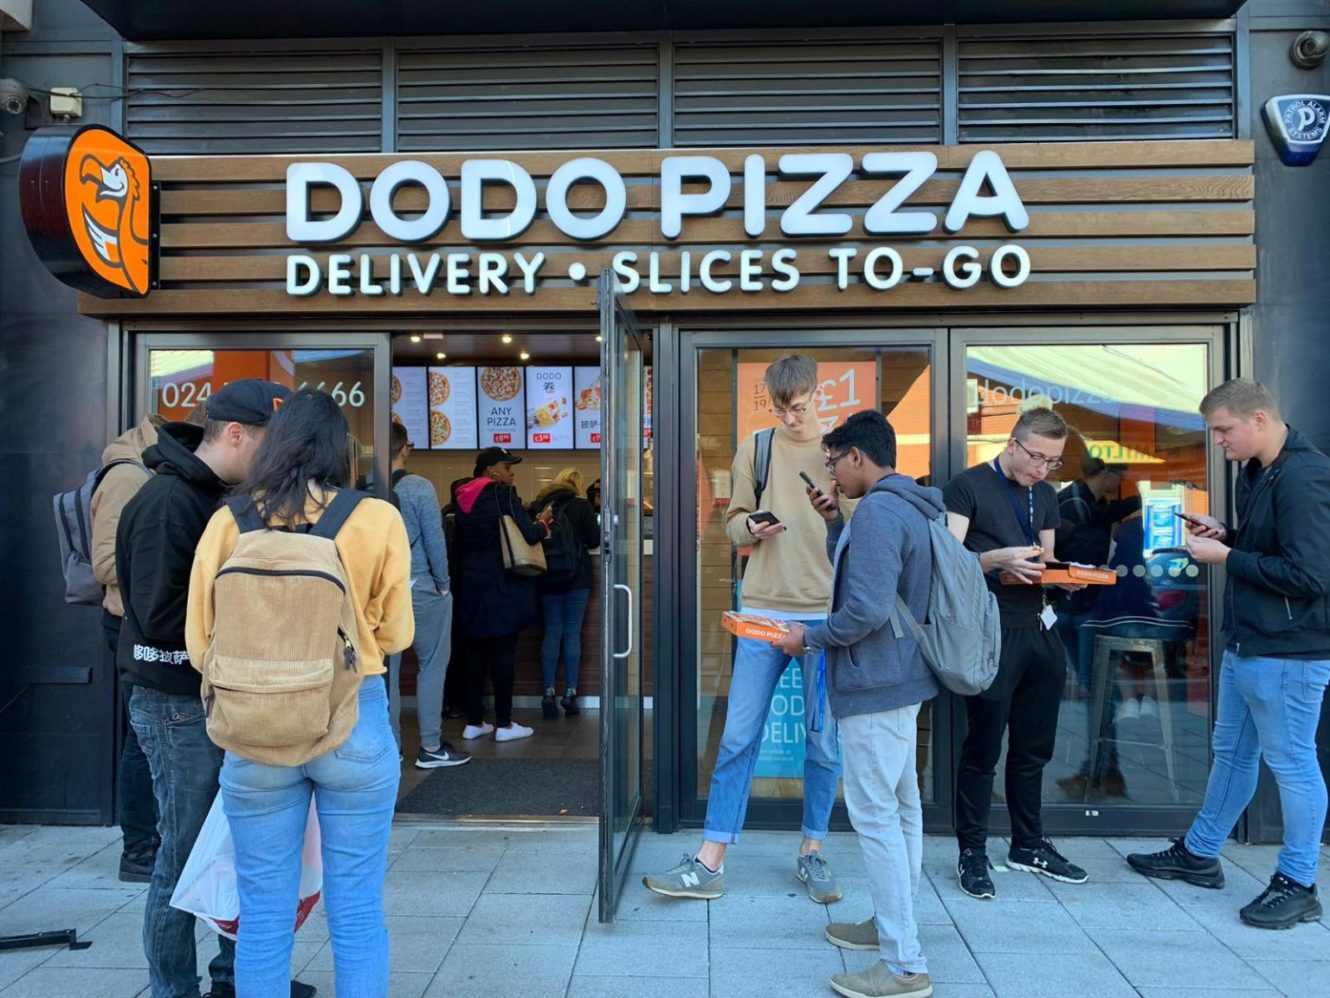 Dodo's UK venture: launching a fast‑casual pizza delivery in Leamington Spa